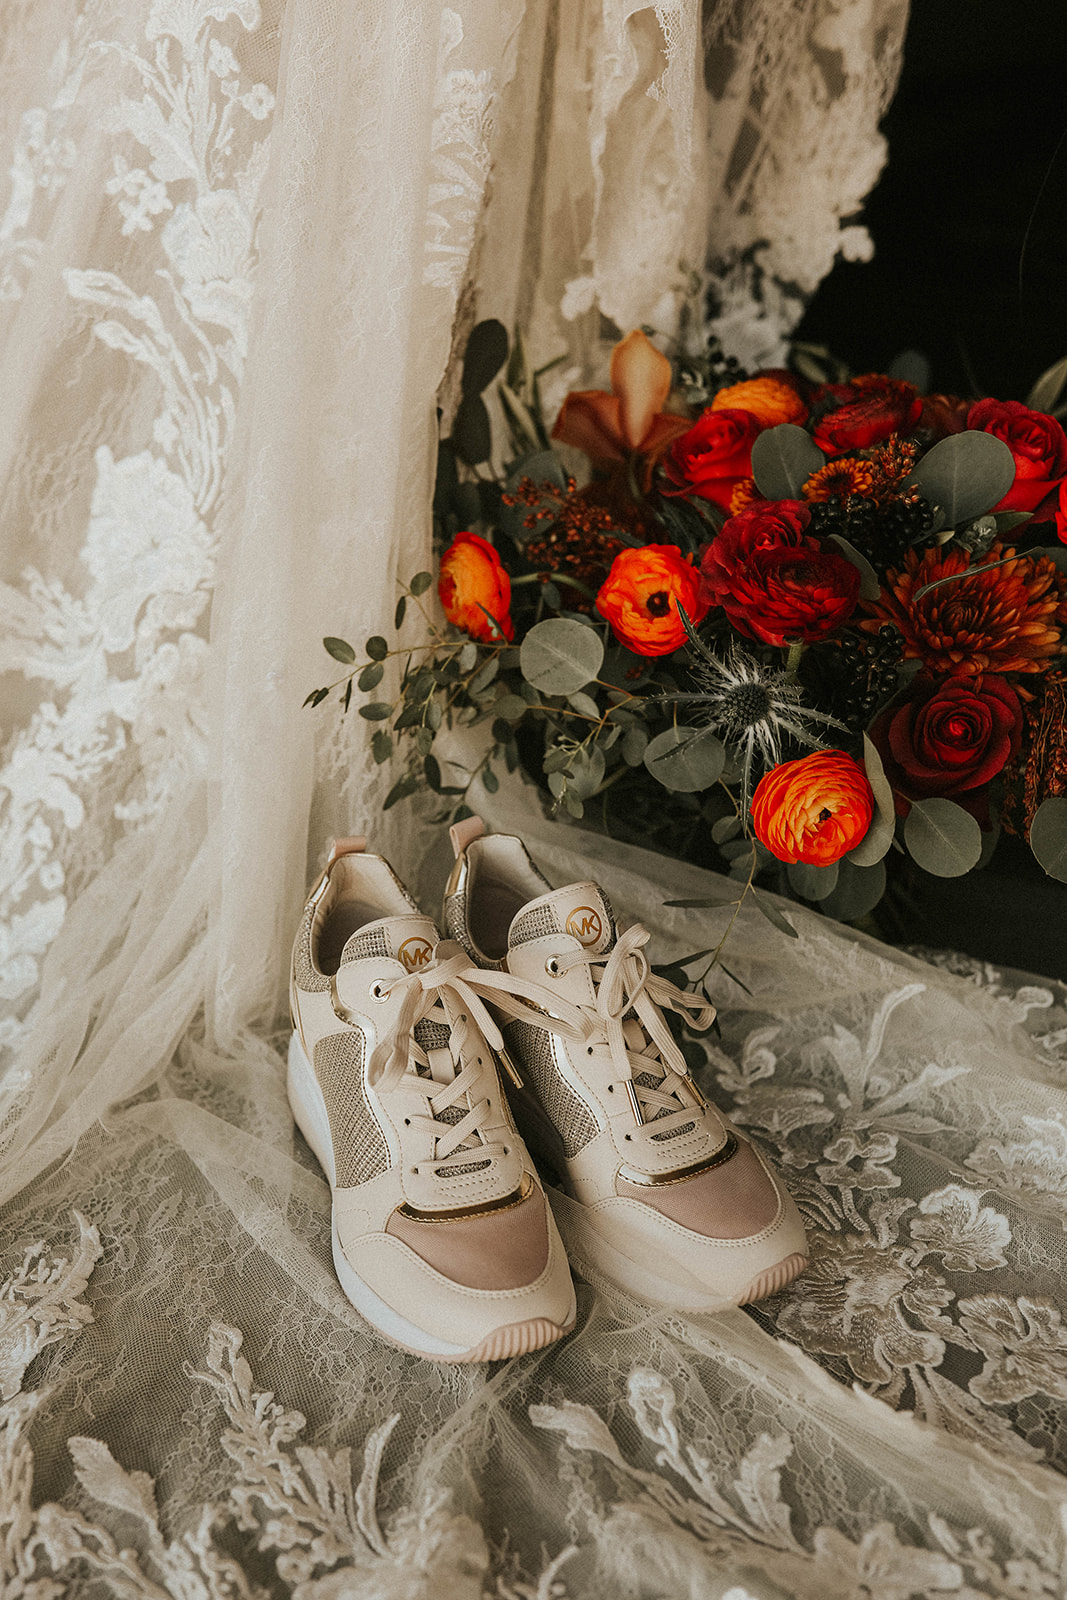 Bottom of Bride's Dress, Bouquet & Michael Kors Sneakers in Dry Lake Bed Fall Inspired Elopement 